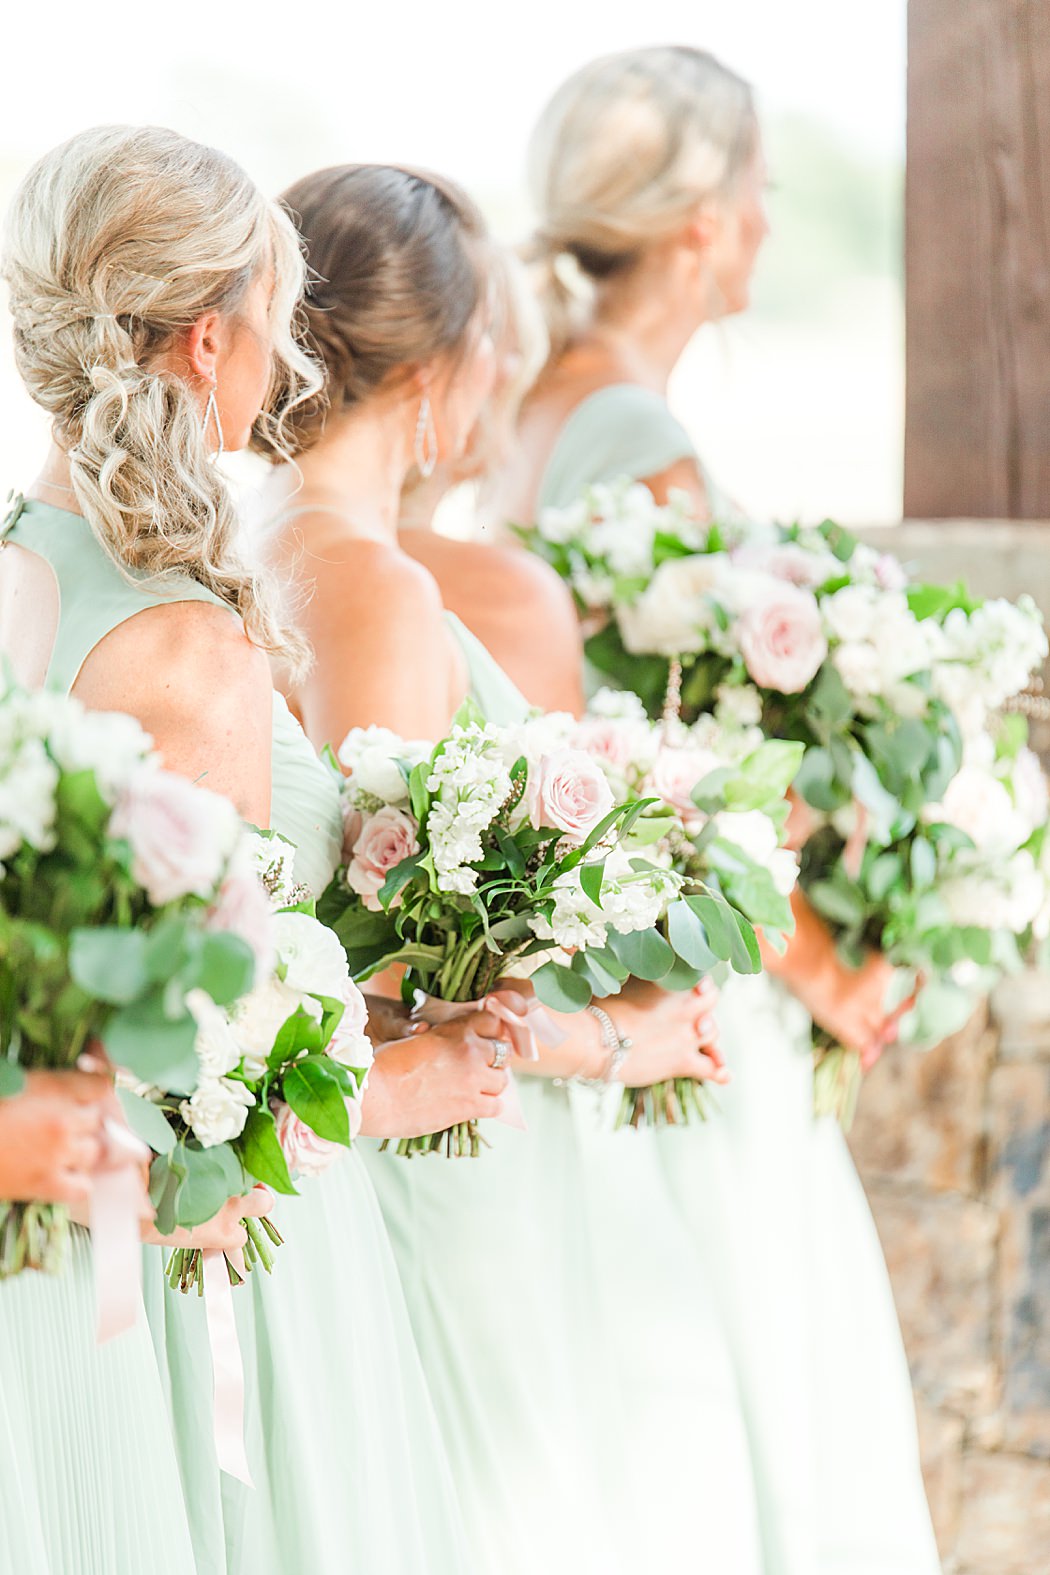 Summer Wedding at The Lodge at Country Inn Cottages in Fredericksburg Texas by Allison Jeffers Photography 0069